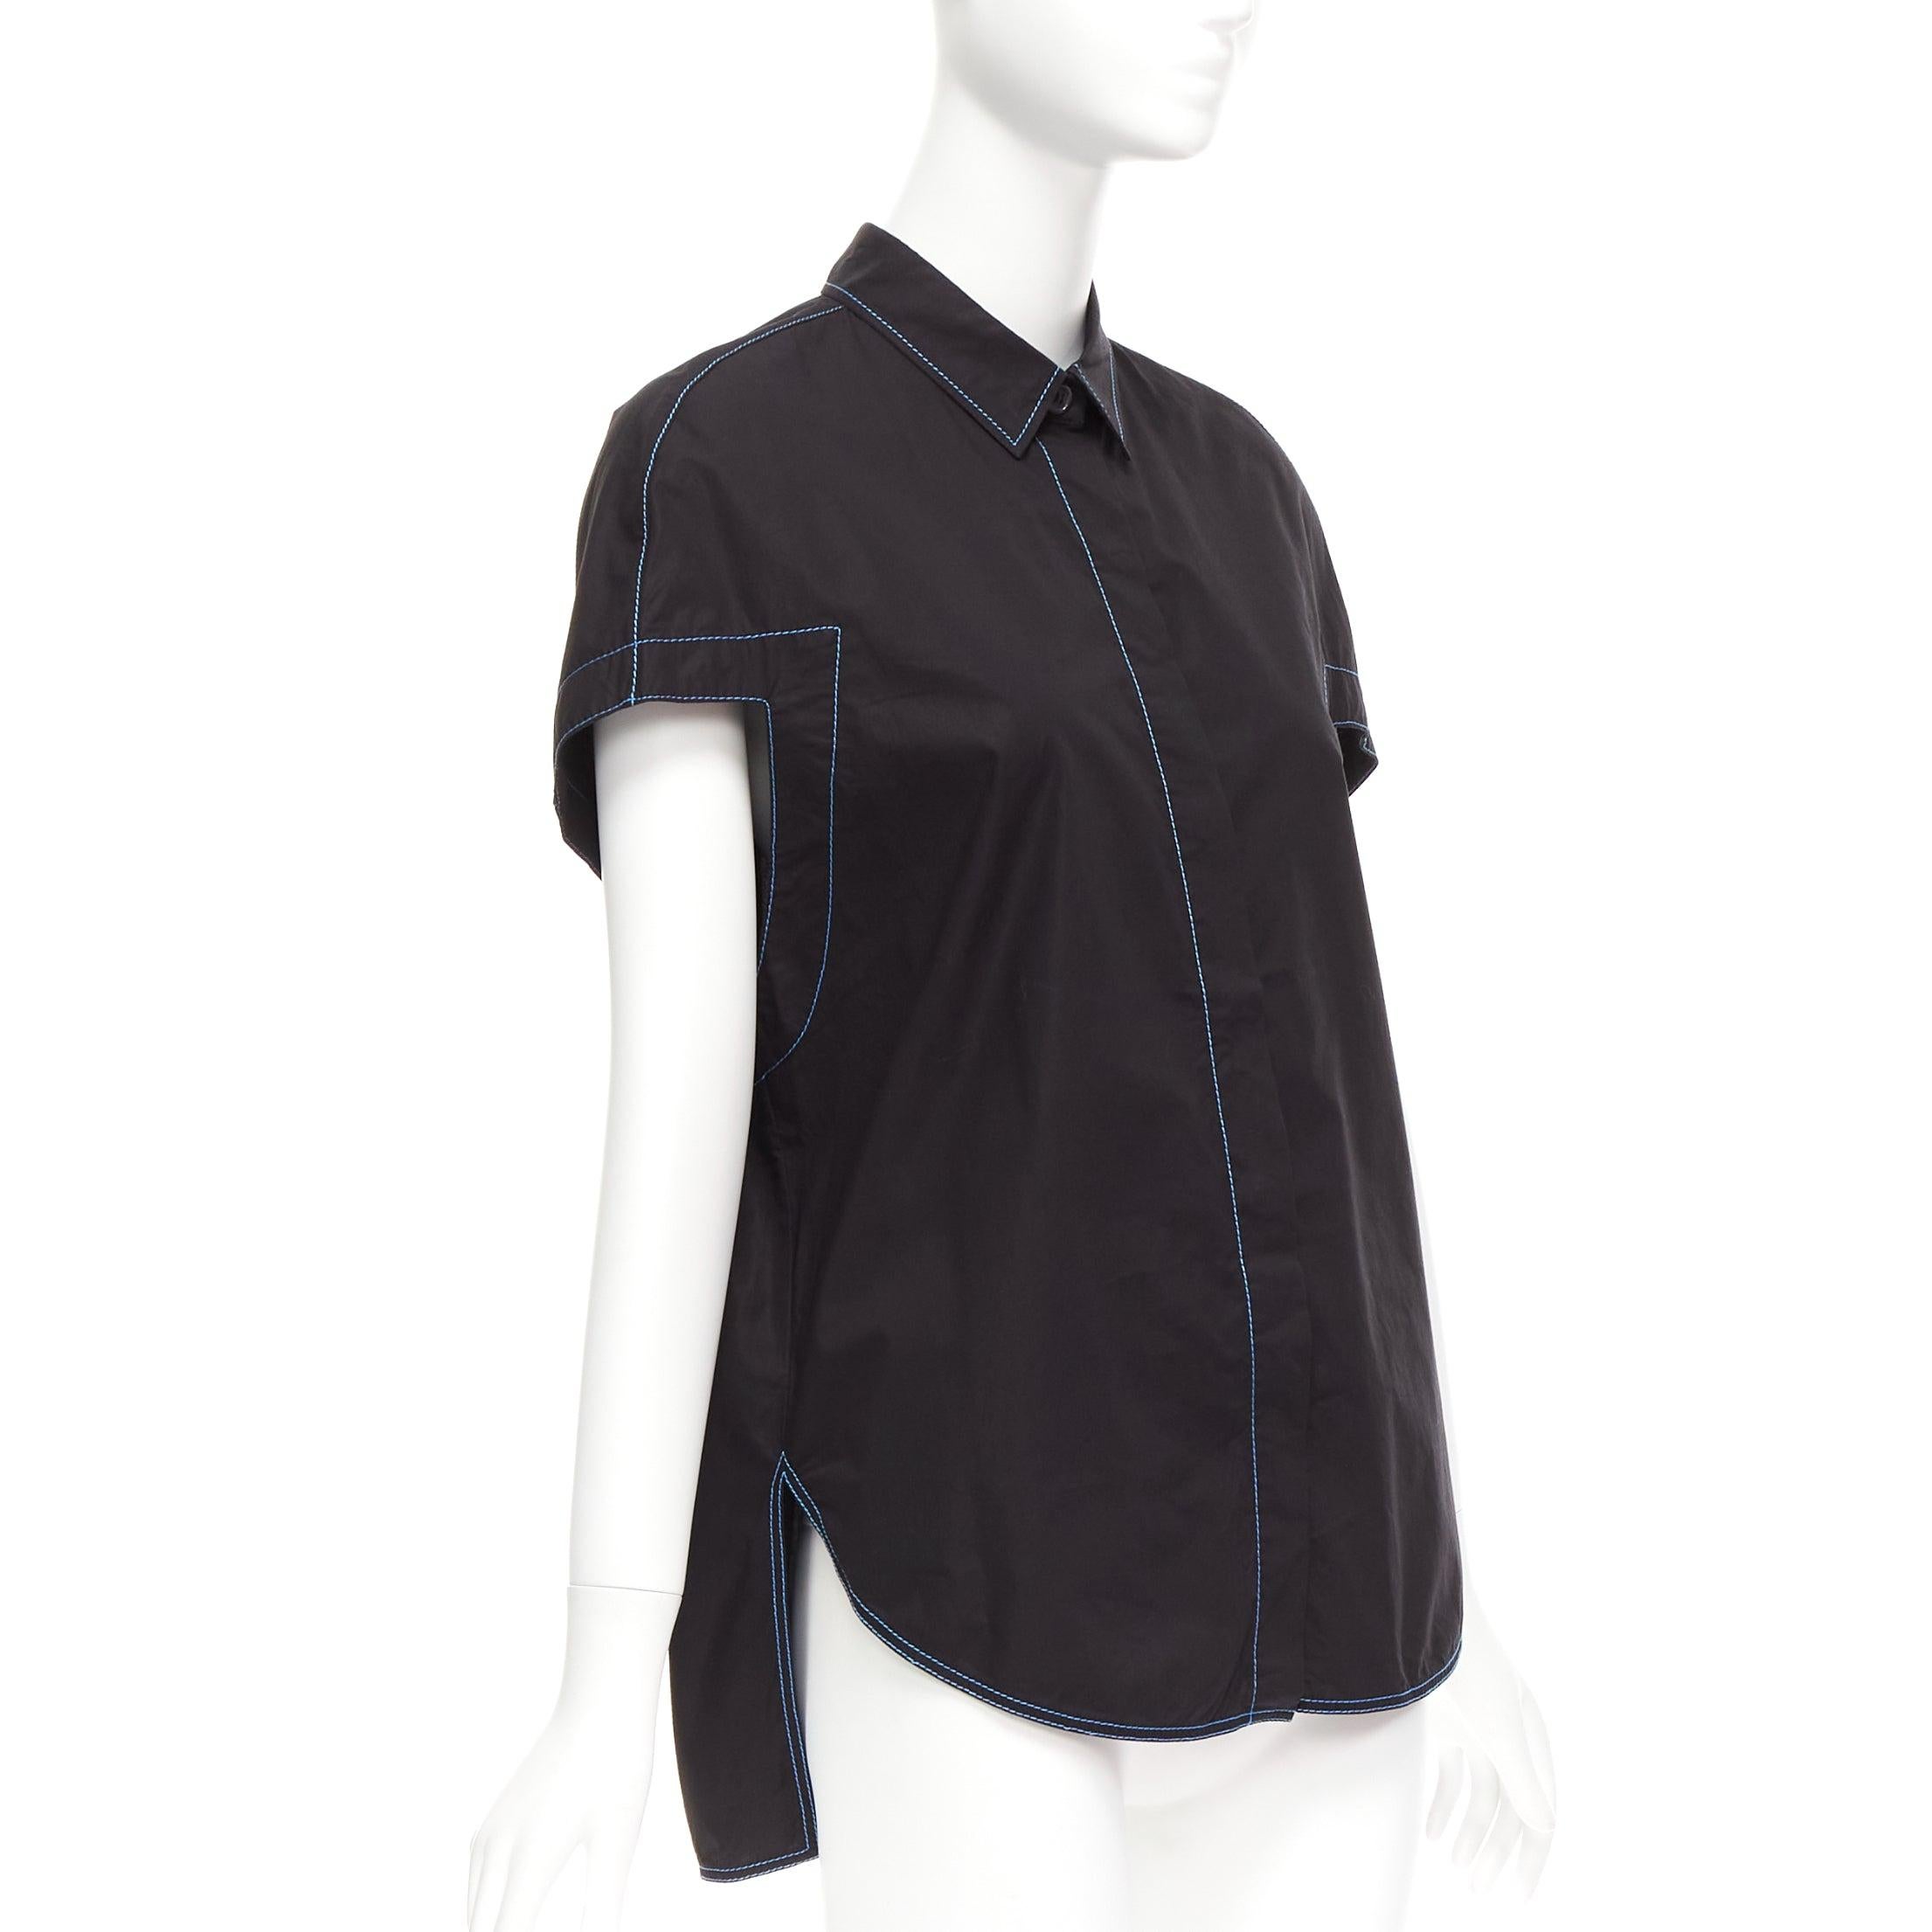 MARNI black blue topstitched round shoulder 3D cut boxy shirt IT40 S
Reference: CELG/A00330
Brand: Marni
Material: Cotton
Color: Black, Blue
Pattern: Solid
Closure: Button
Extra Details: Hidden placket. Angular armhole.
Made in: